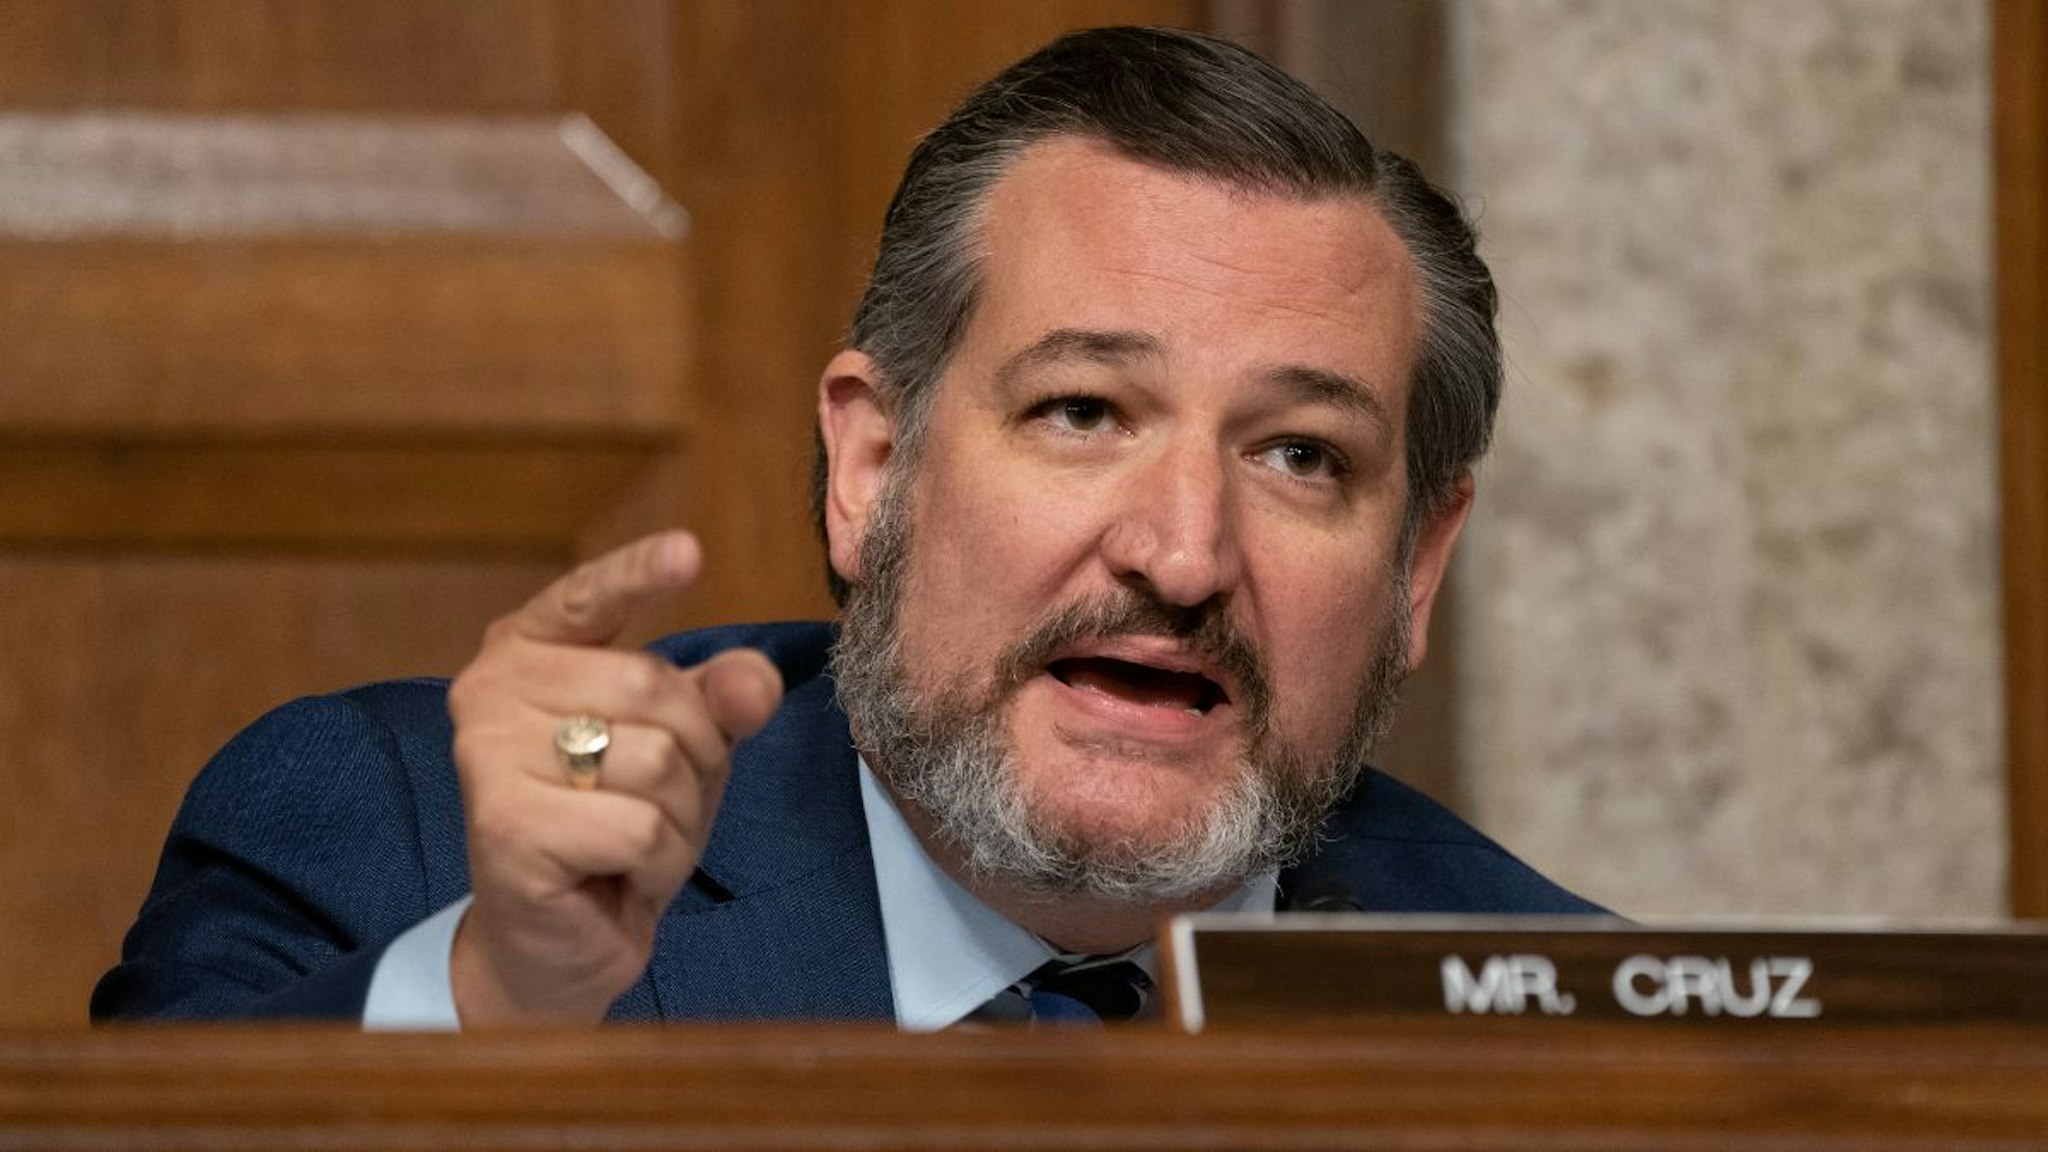 U.S. Sen. Ted Cruz (R-TX) questions former FBI Director James Comey, who was appearing remotely, at a hearing of the Senate Judiciary Committee on September 30, 2020 in Washington, DC.